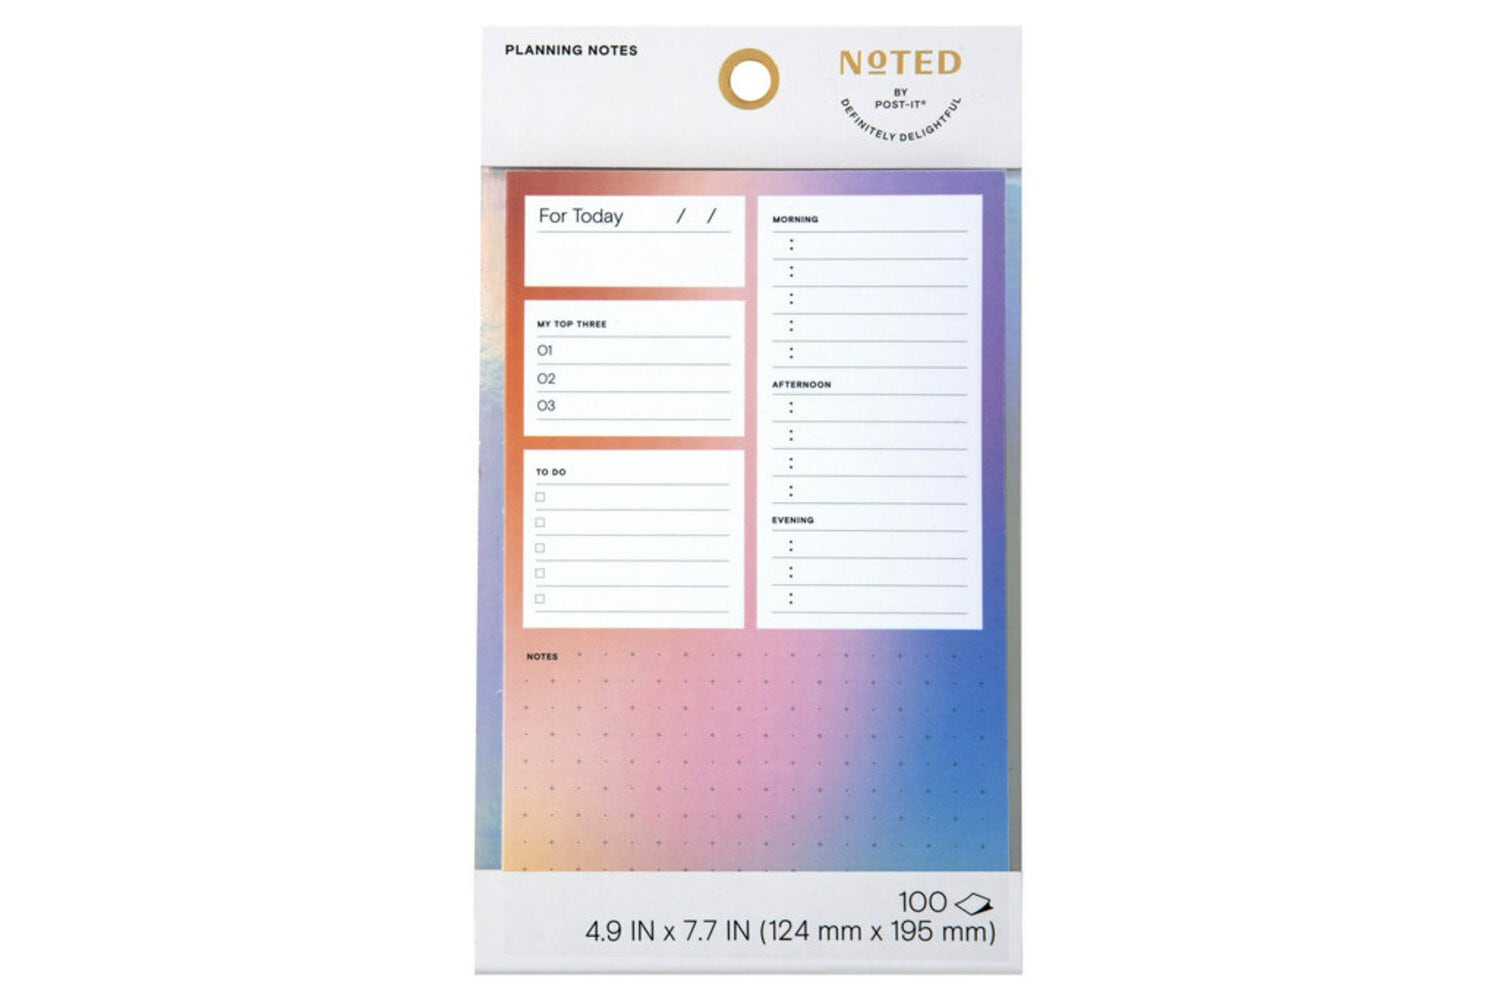 7100297304 - Post-it Planning Your Day Notes NTD7-58-1, 4.9 in x 7.7 in (124 mm x 195 mm)